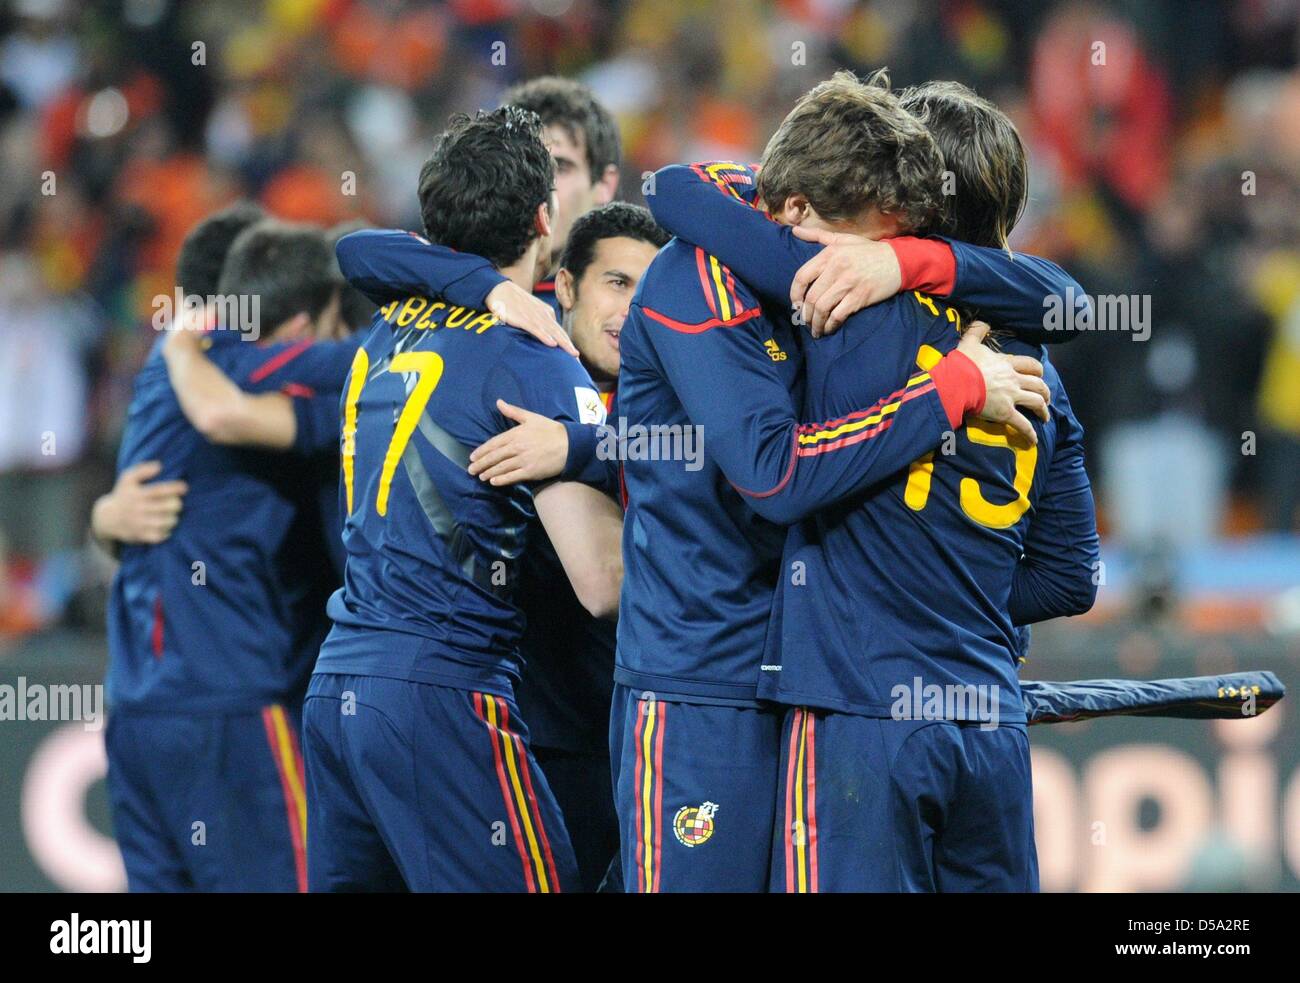 Spanish players celebrate after the final whistle of the 2010 FIFA World Cup final match between the Netherlands and Spain at the Soccer City Stadium in Johannesburg, South Africa 11 July 2010. Photo: Bernd Weissbrod dpa - Please refer to http://dpaq.de/FIFA-WM2010-TC Stock Photo